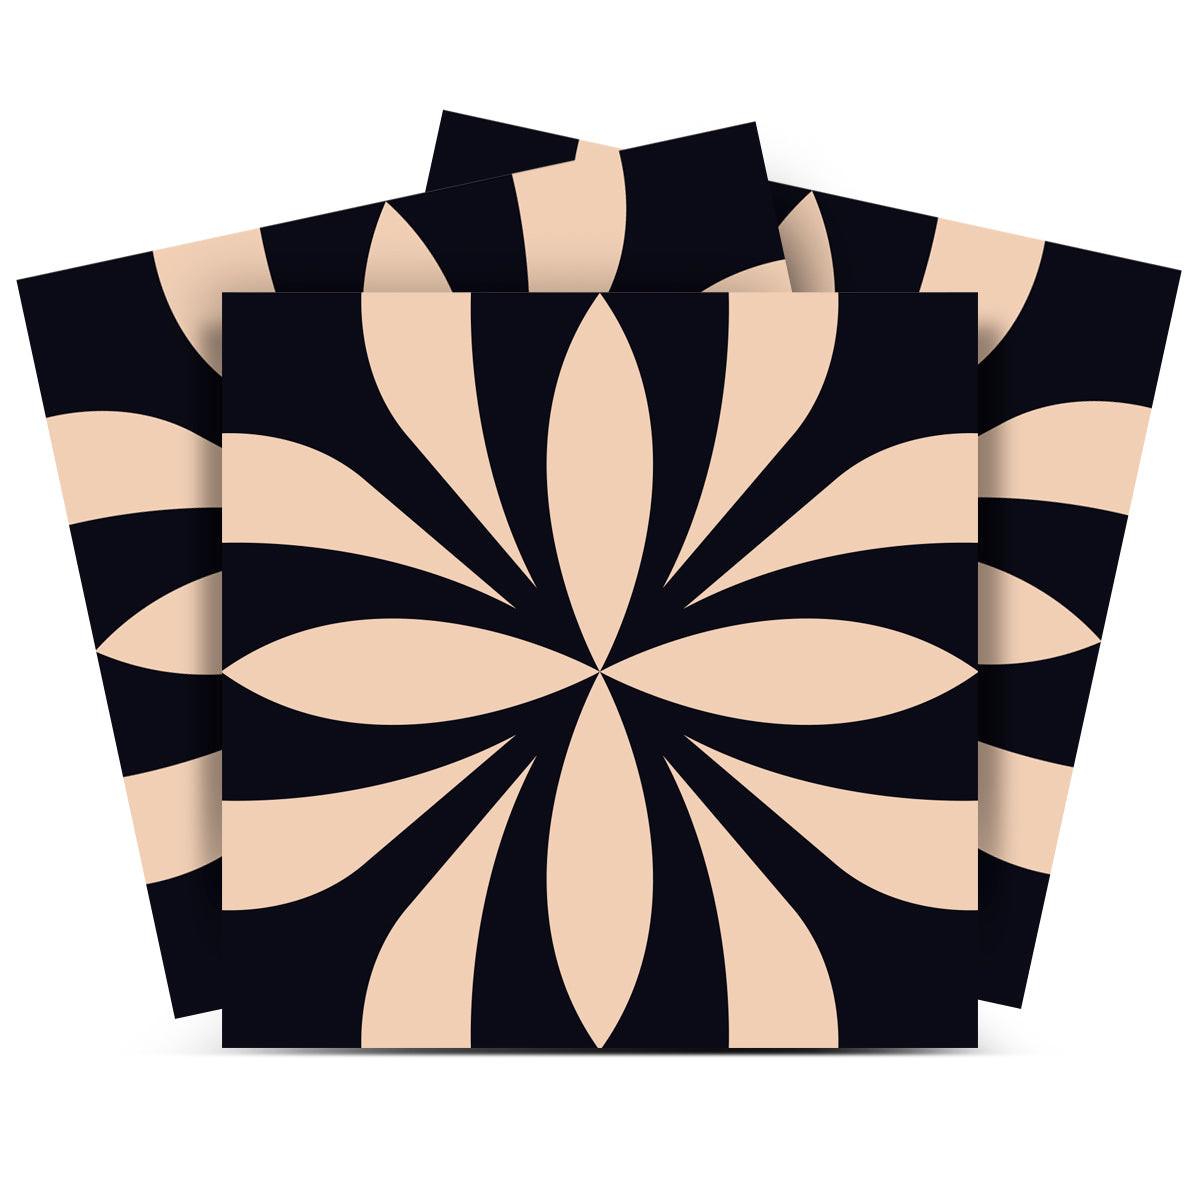 8" X 8" Intertwined Black And Cream Peel And Stick Removable Tiles-390772-1